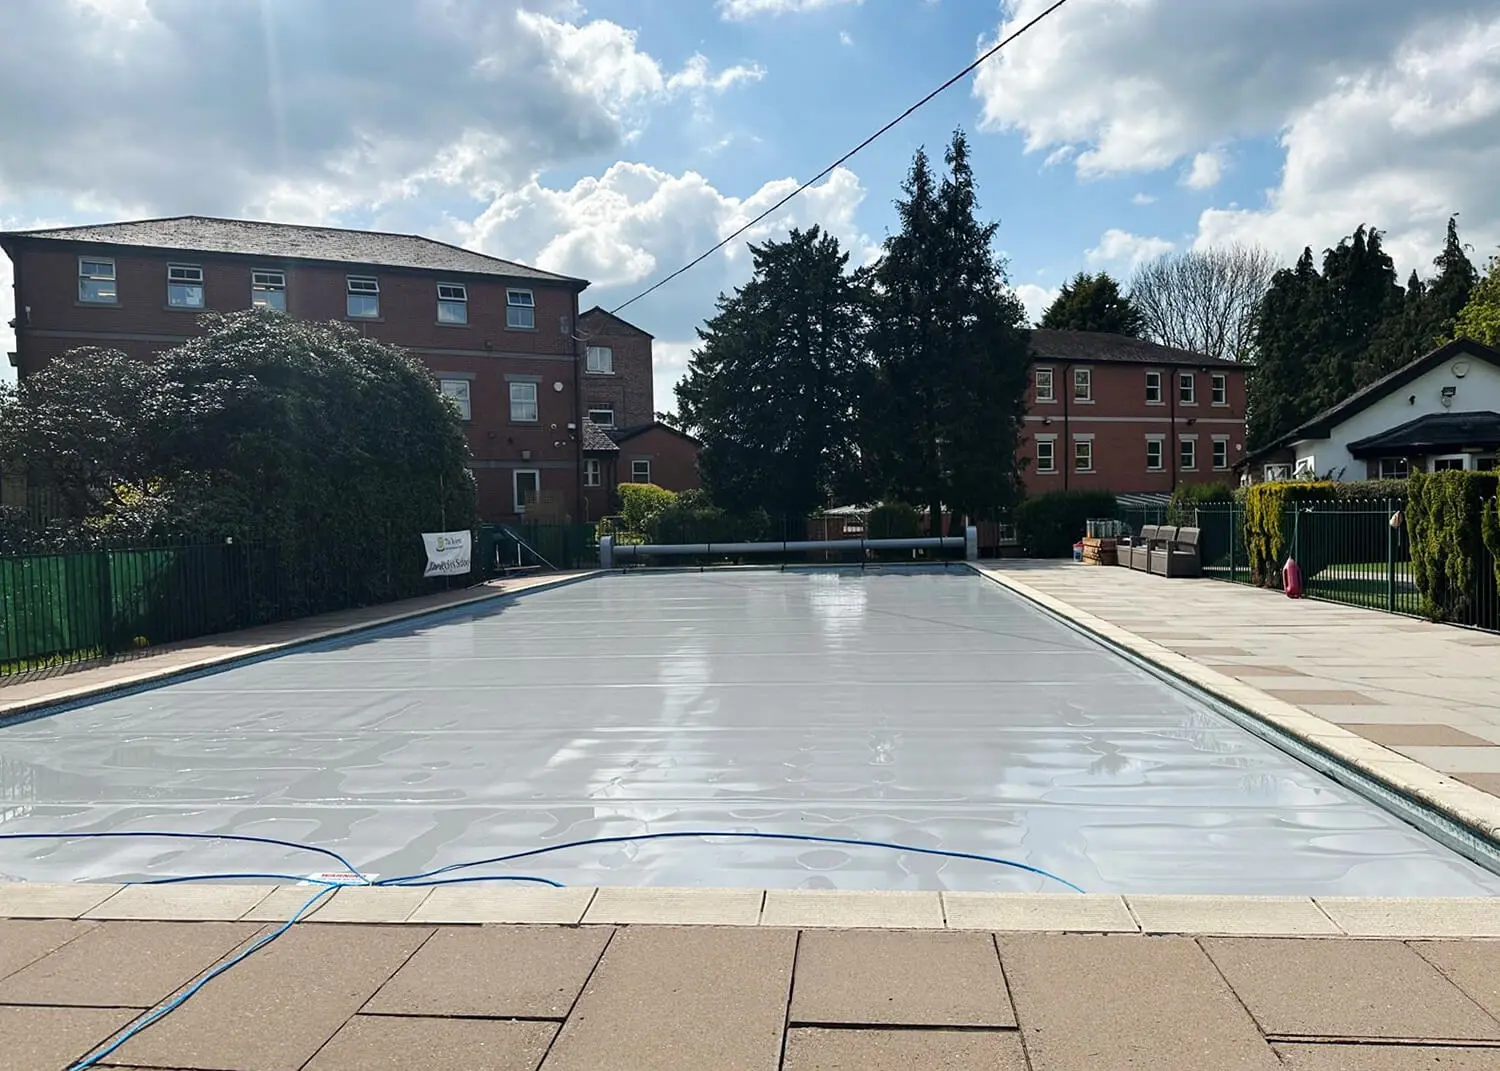 Swimming pool at The Ryleys School, a private school in Alderley Edge